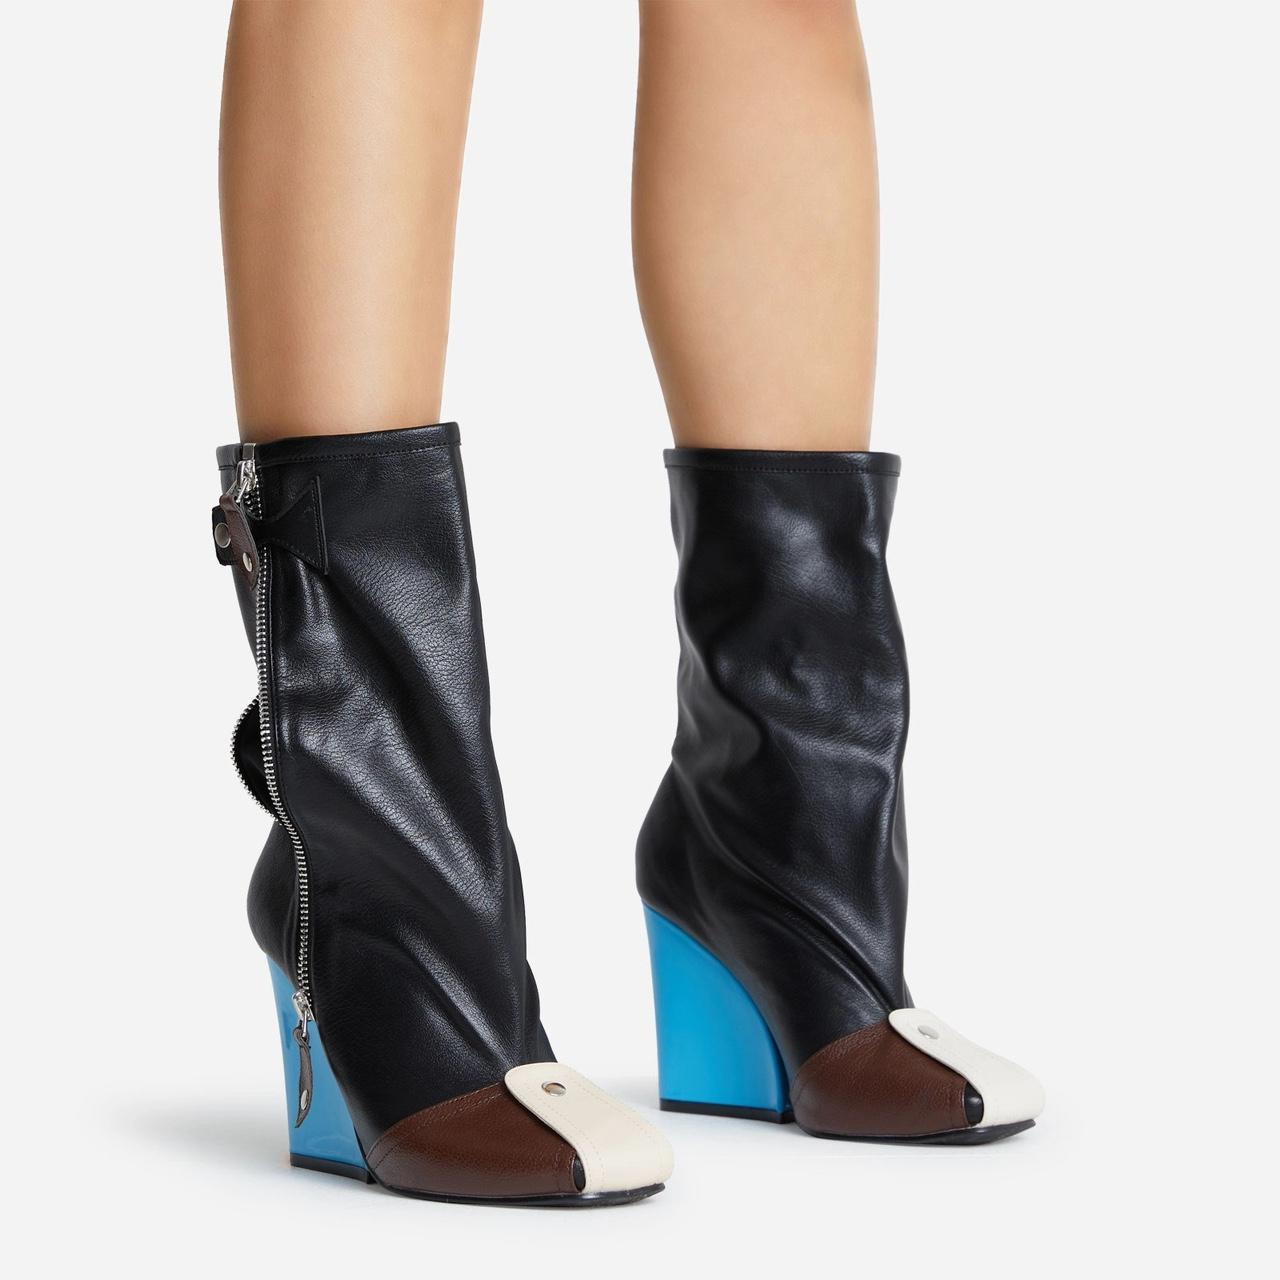 EGO Women's Black and Blue Boots